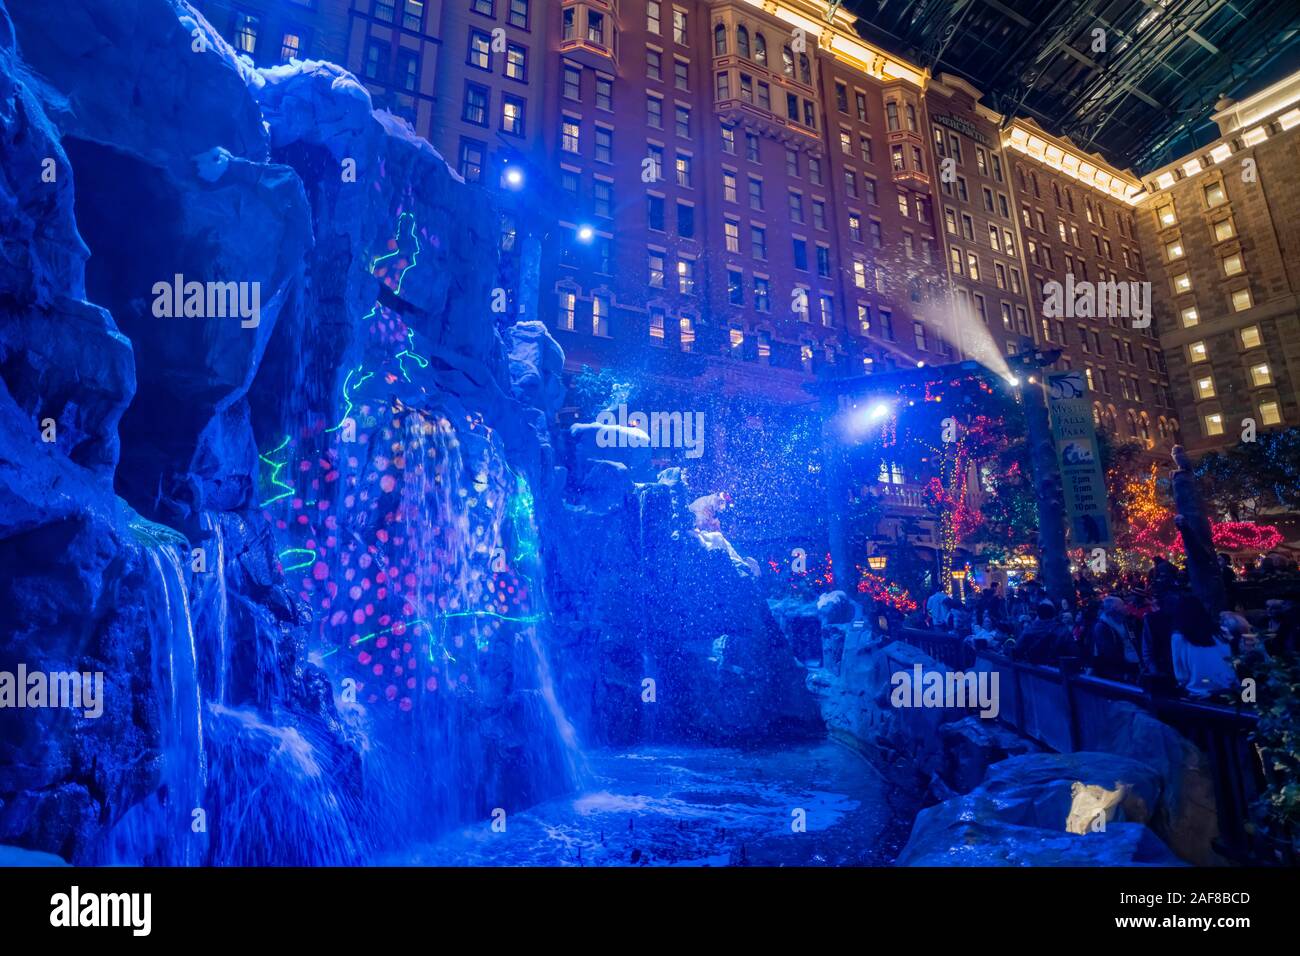 Las Vegas, DEC 12: Beautiful Christmas lights and shows of the Mystic Falls Park in Sam's Town on DEC 12, 2019 at Las Vegas, Nevada Stock Photo